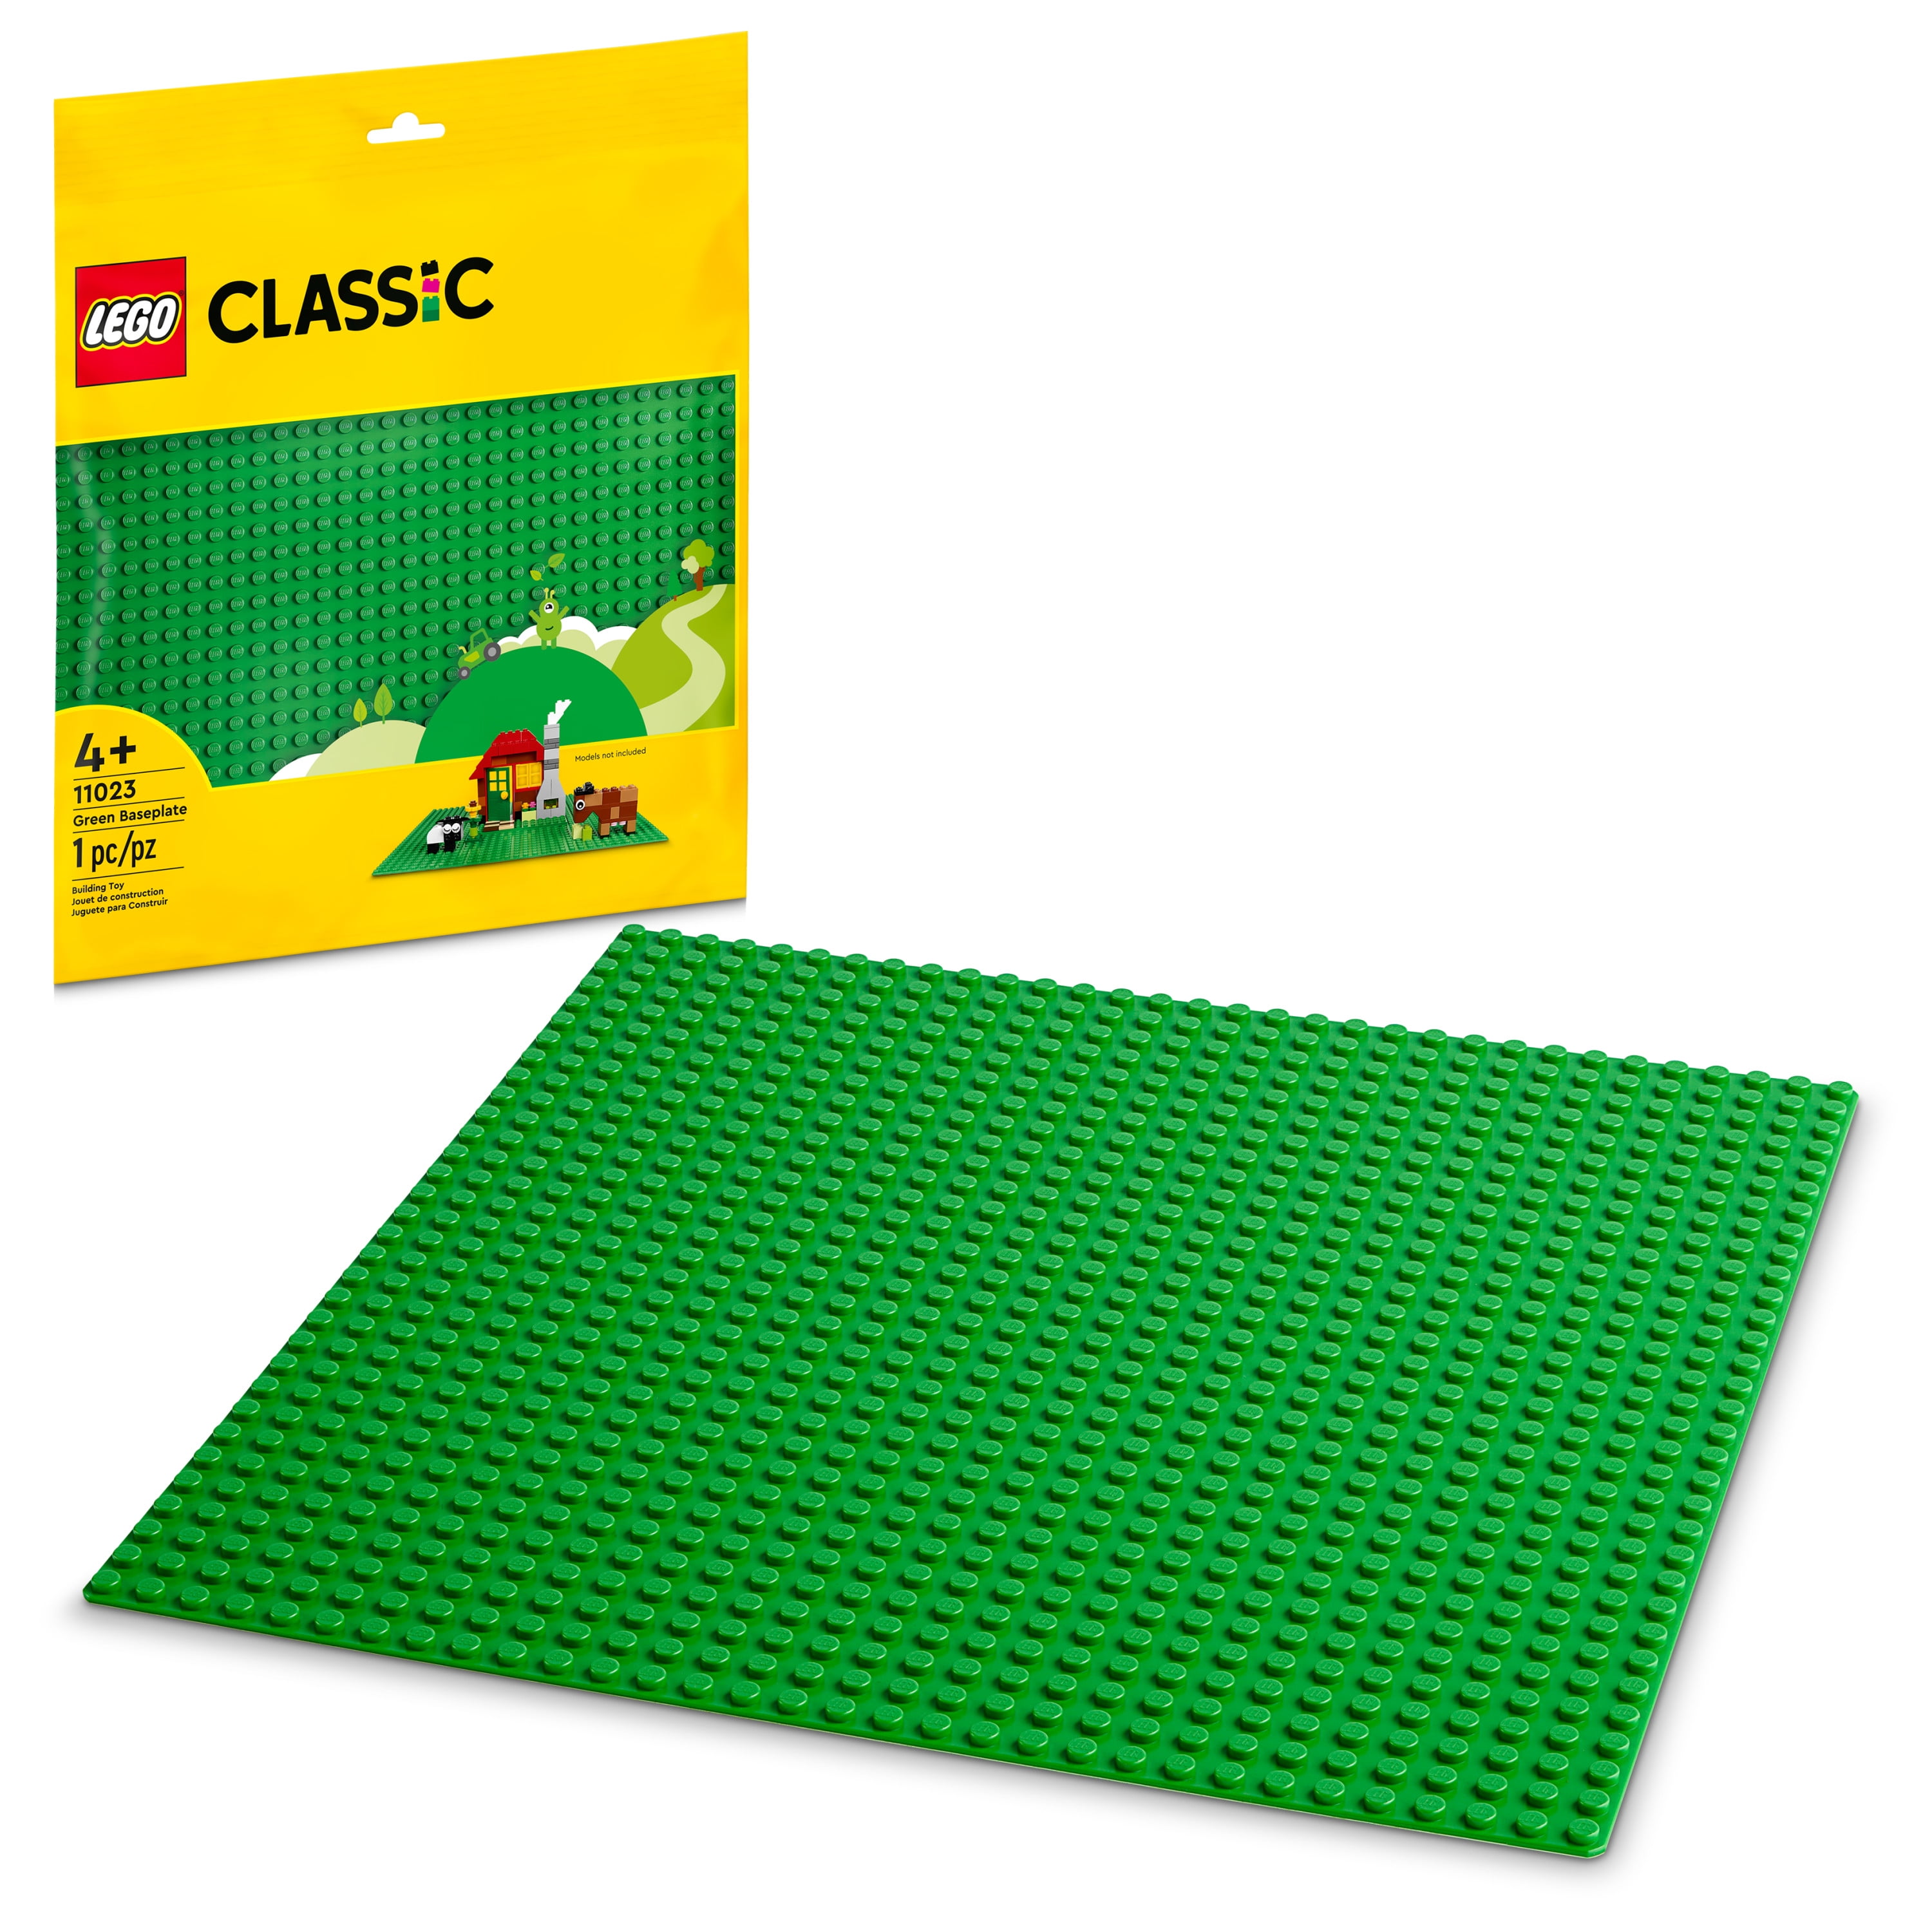 korruption pension træ LEGO Classic Green Baseplate 11023 Building Kit; Square 32x32 Landscape for  Open-Ended Imaginative Building Play; Can be Given as a Birthday, Holiday  or Any-Day Gift for Kids Aged 4 and up (1